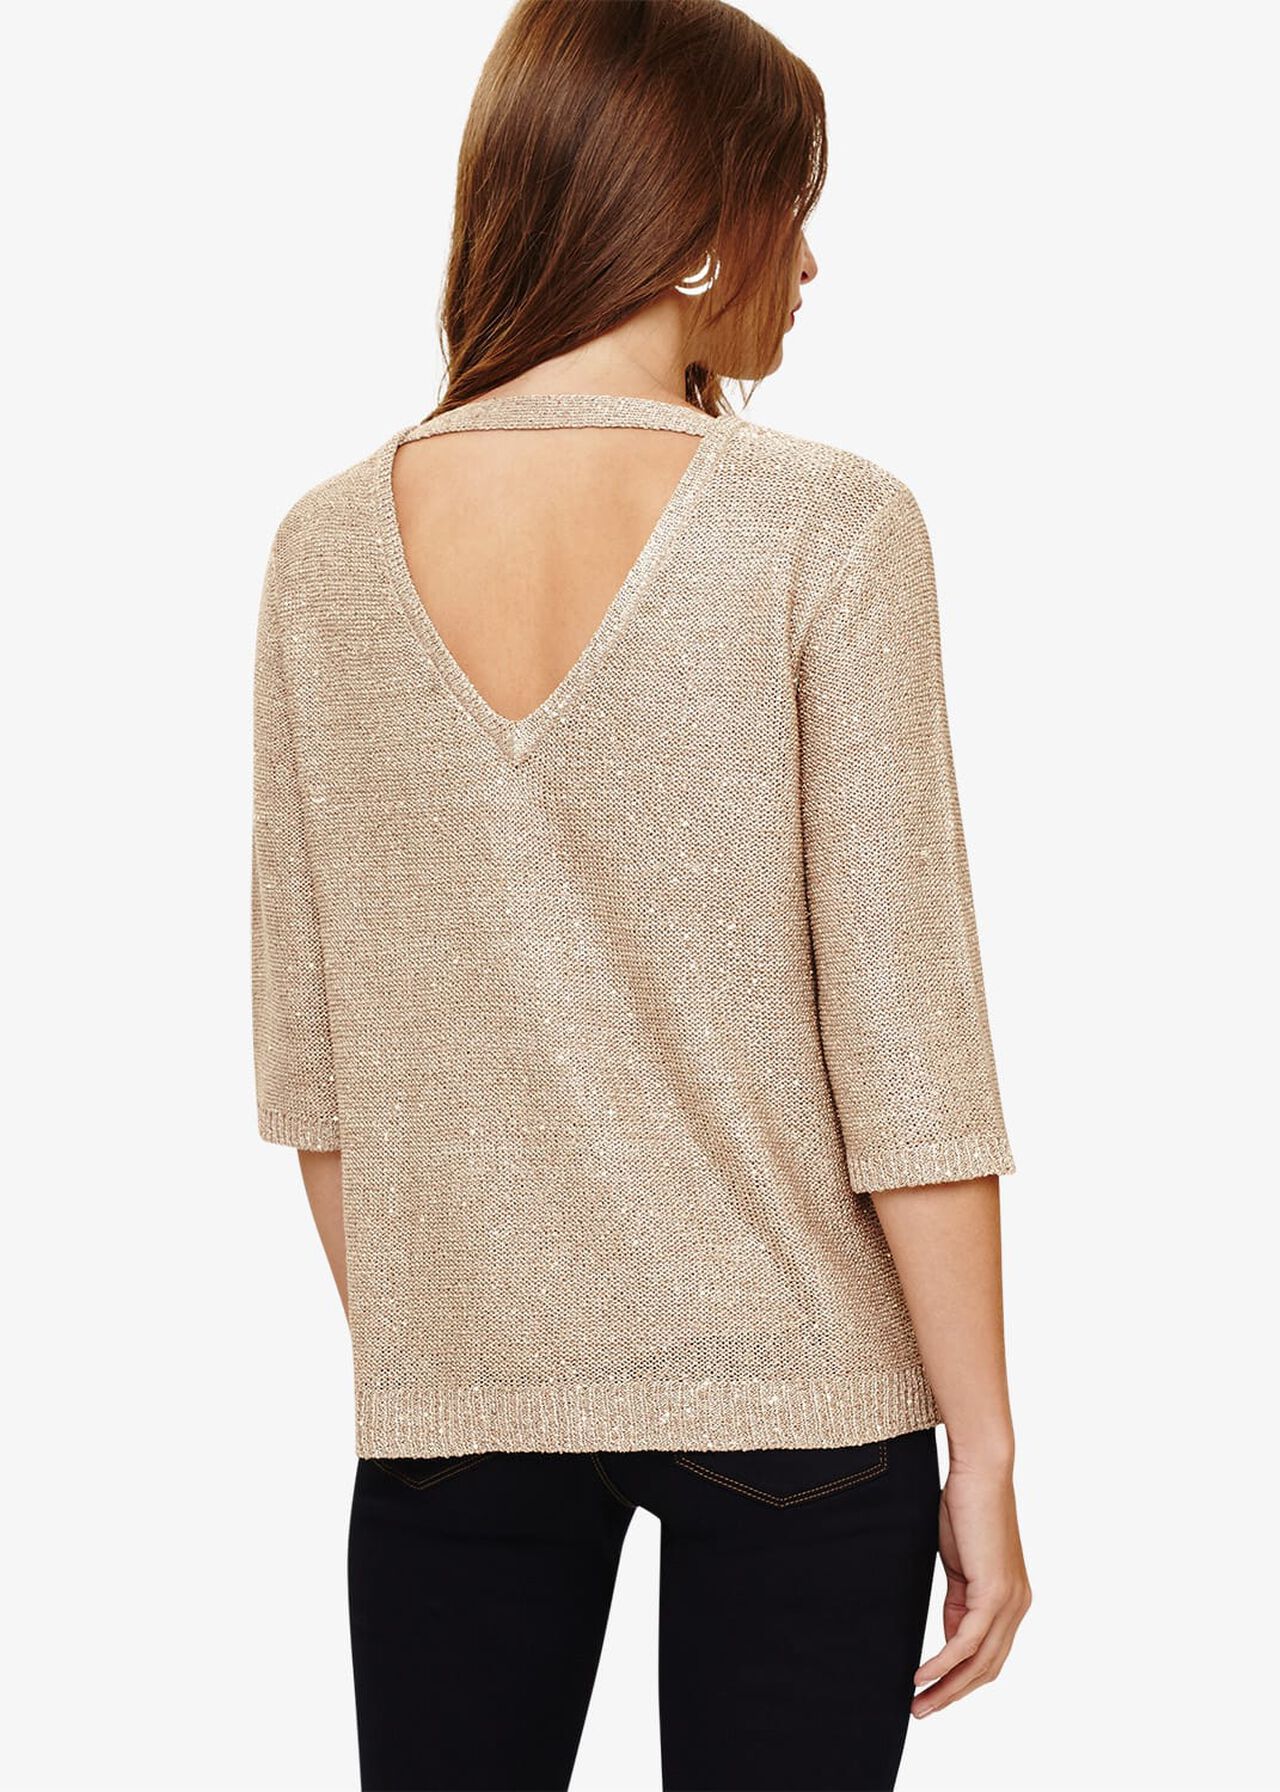 Caley Sequin Knit